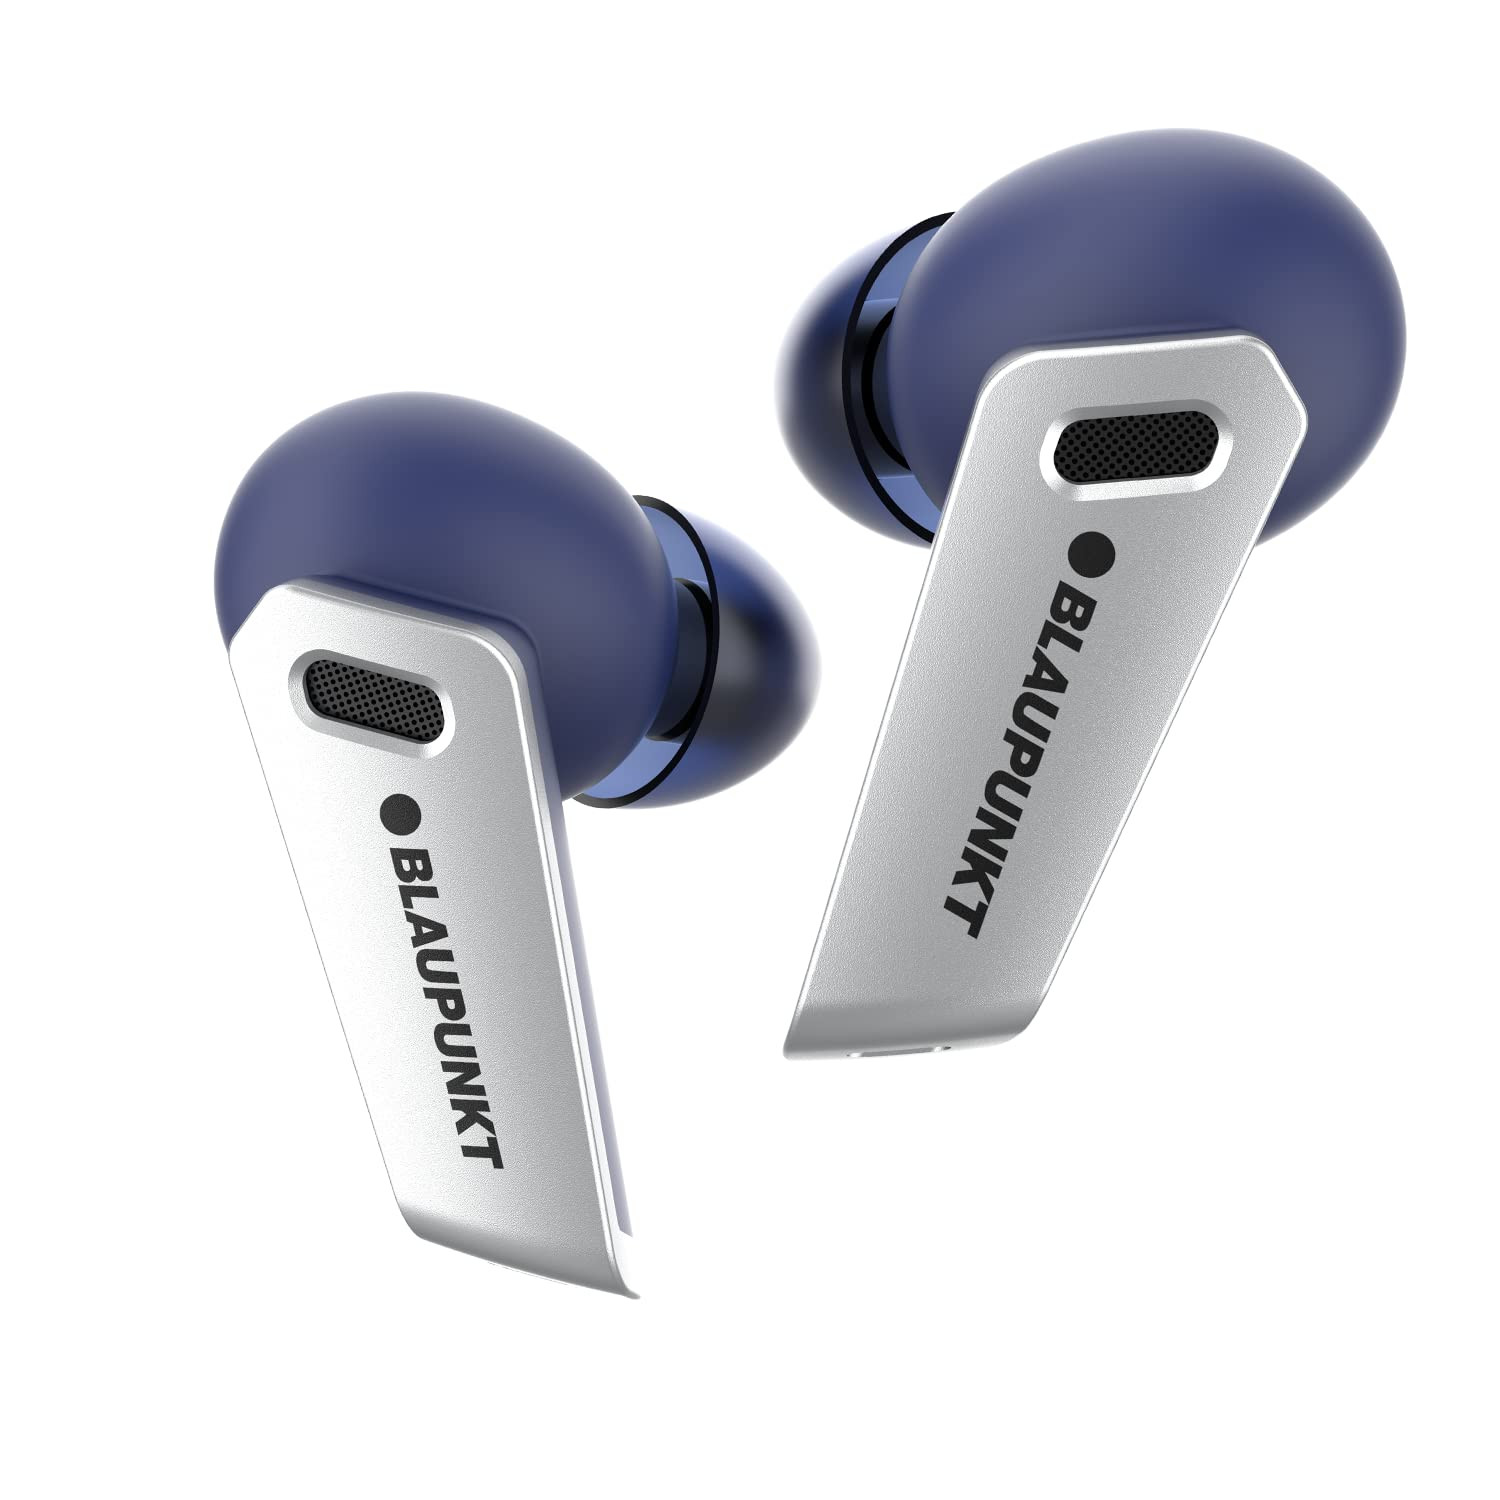 Blaupunkt Newly Launched BTW300 BASS Buds Truly Wireless Bluetooth in Ear Earbuds I Bass Demon Tech I ENC CRISPR TECH I 40Hrs Playtime I TurboVolt Charging I BT Version 5.3 I 80ms Low Latency (Blue)